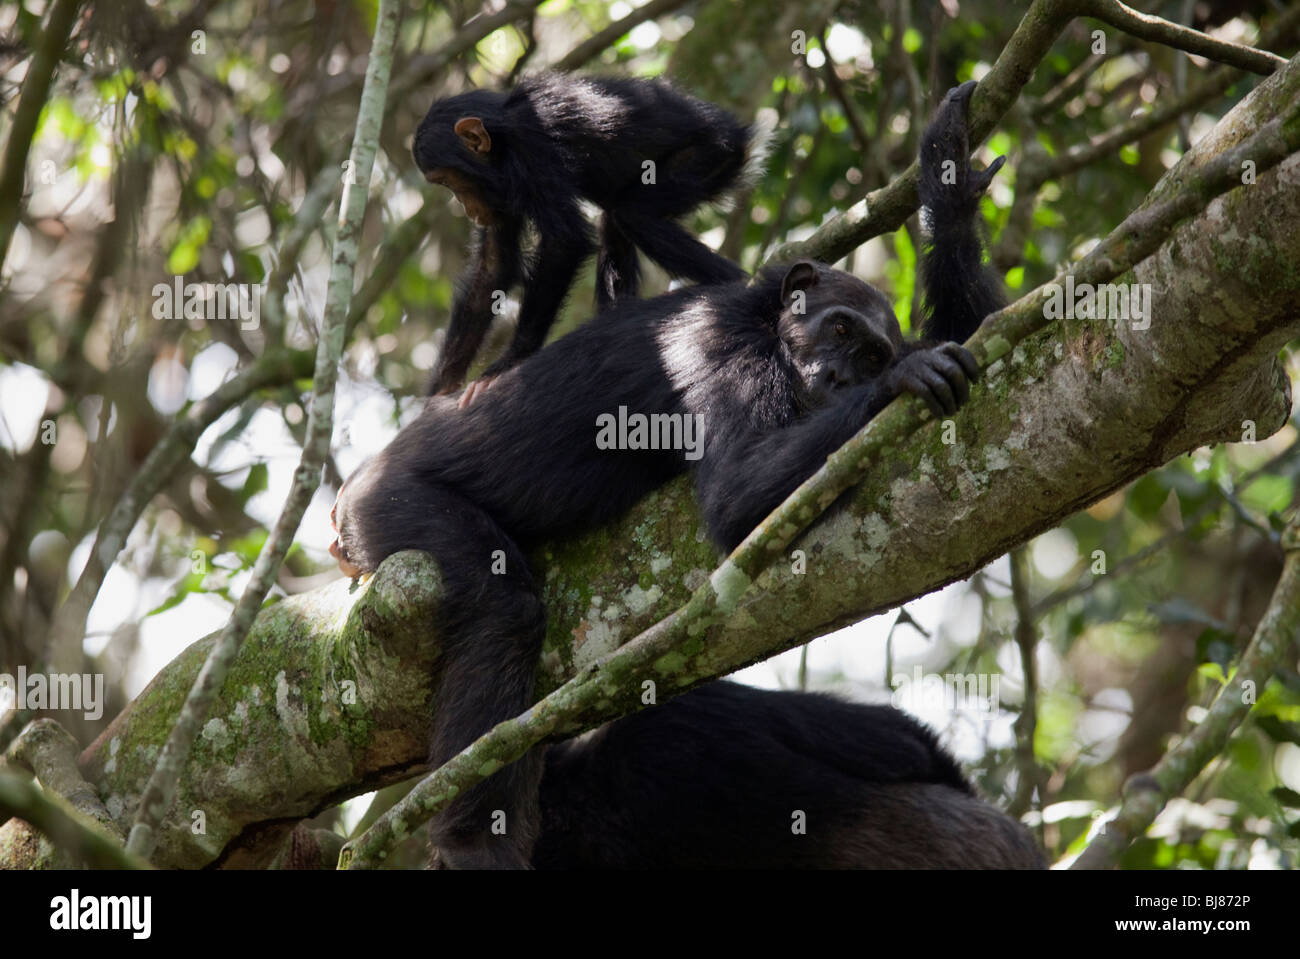 Having a baby means you get no rest.  Emiti trying to sleep while her full of beans baby runs across her back, playing! Stock Photo